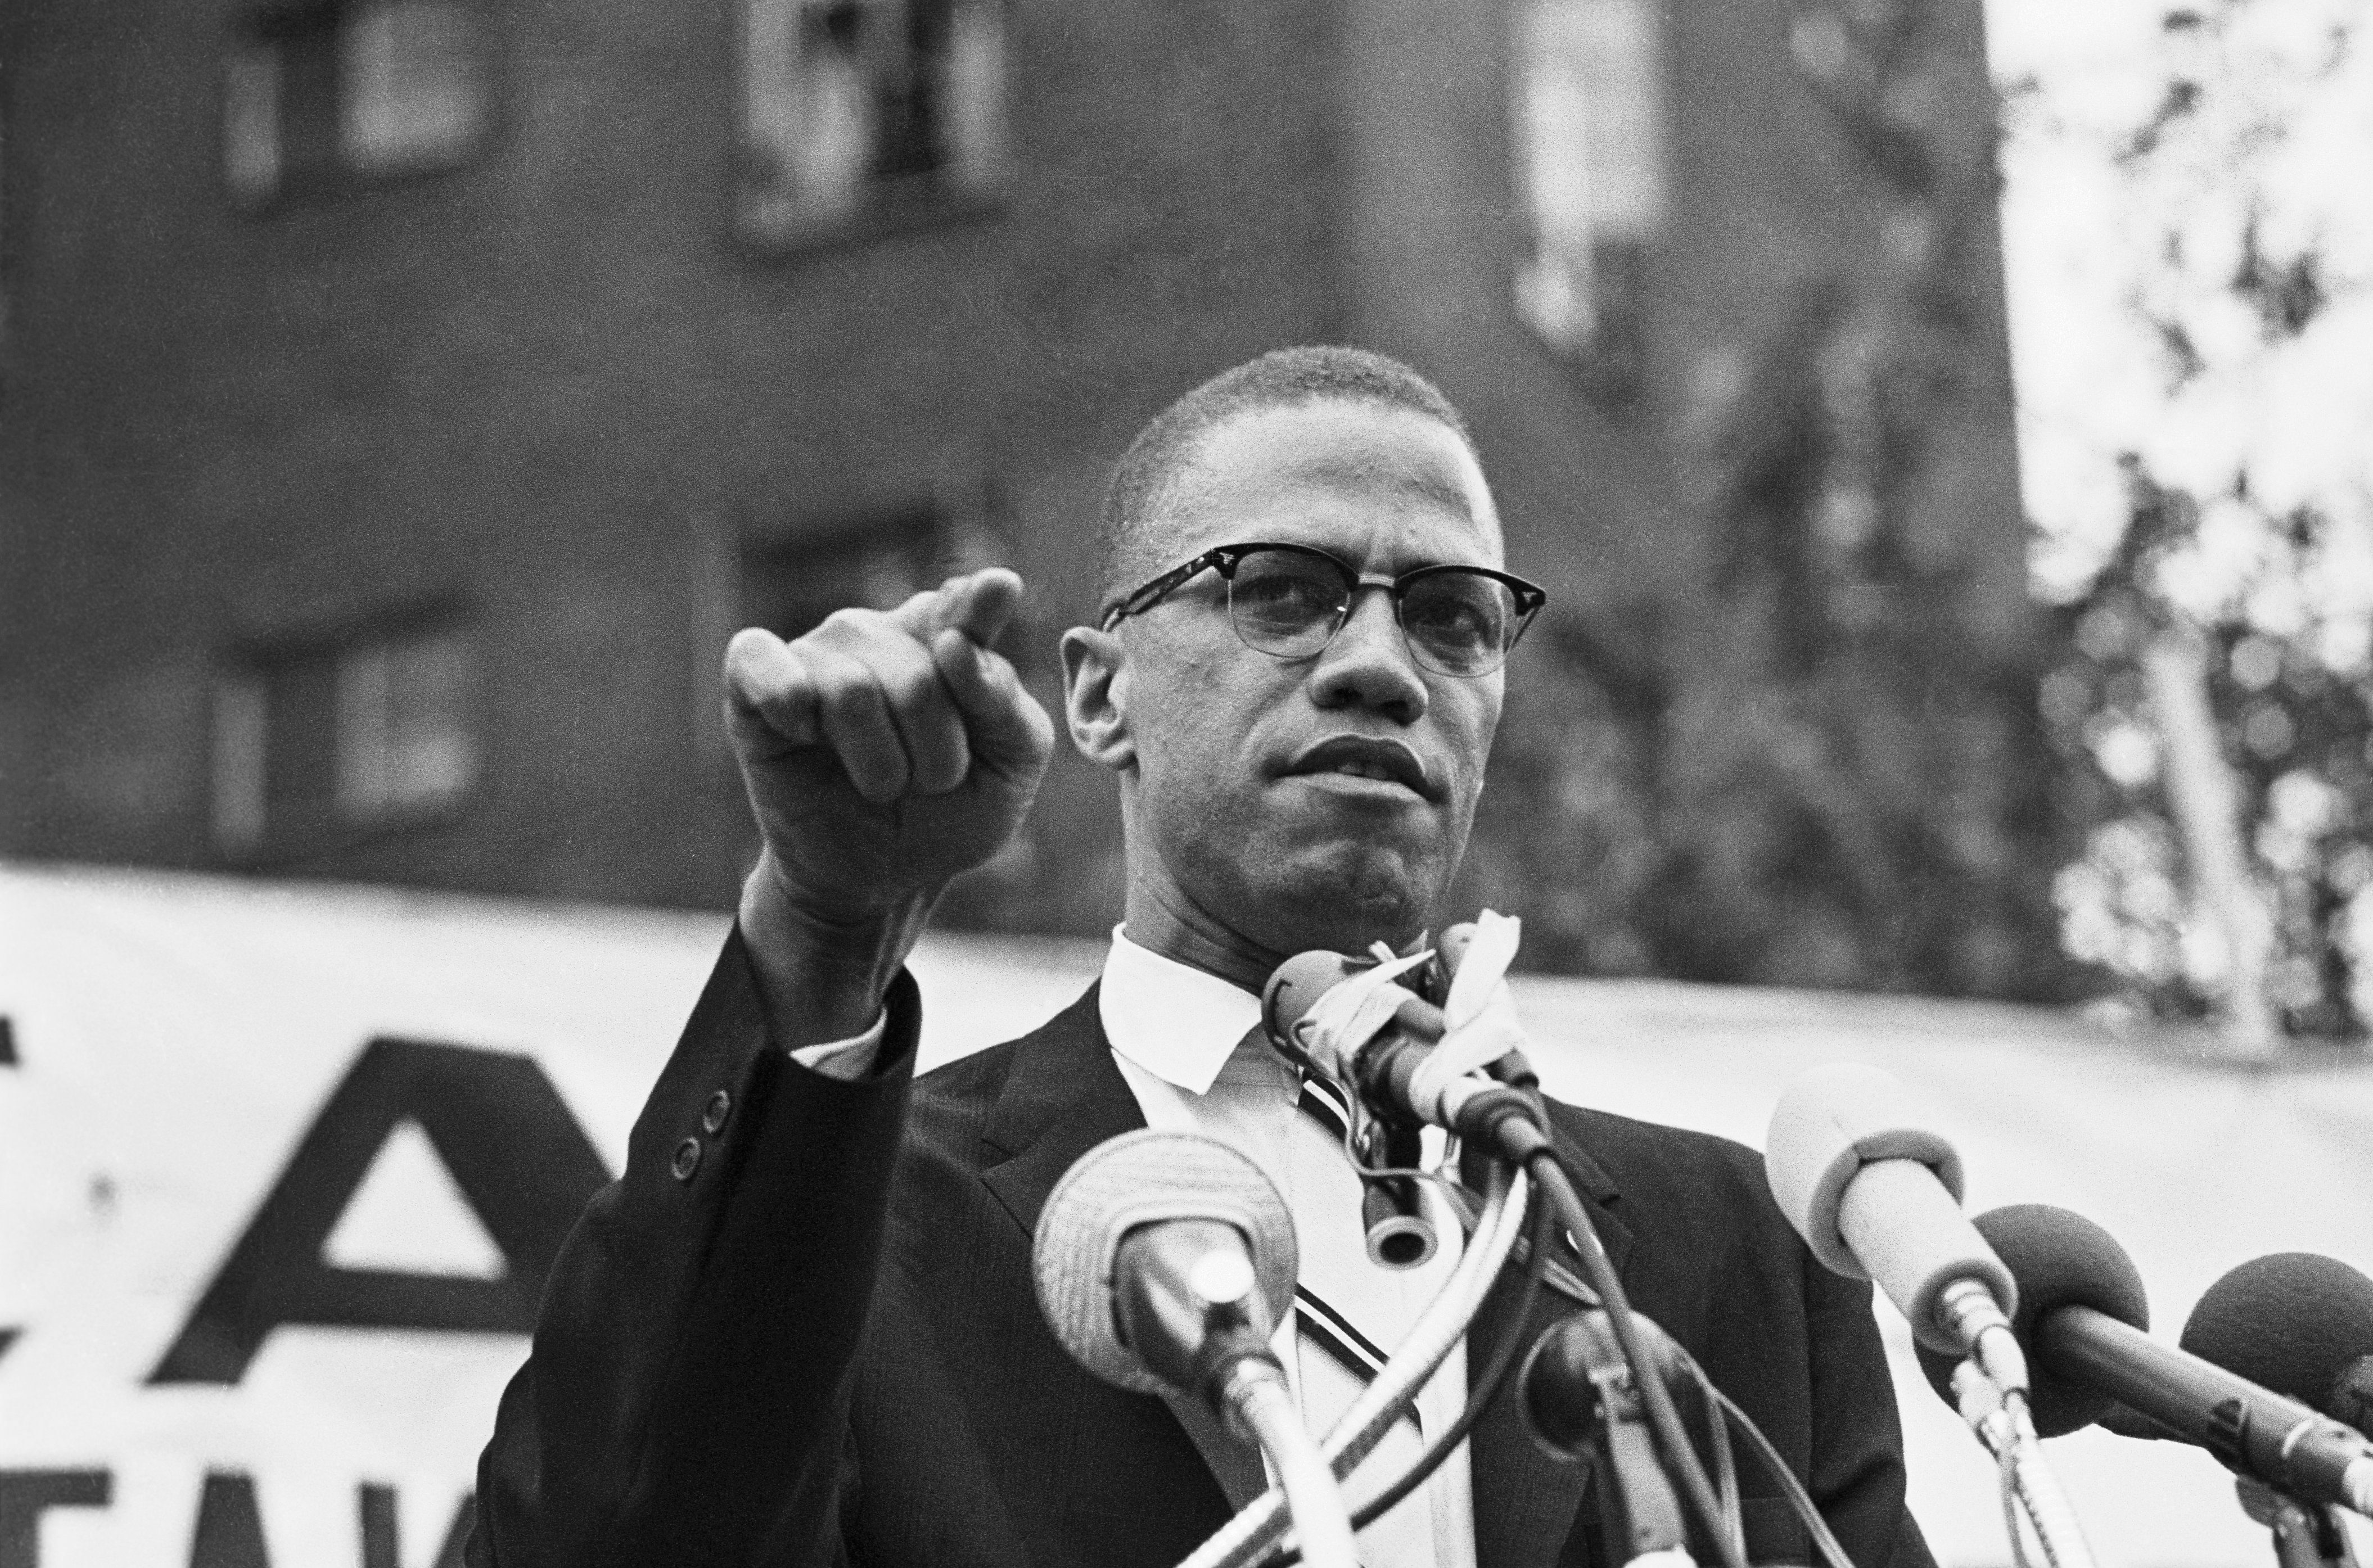 Nation of Islam leader Malcolm X speaking at a rally | Source: Getty Images